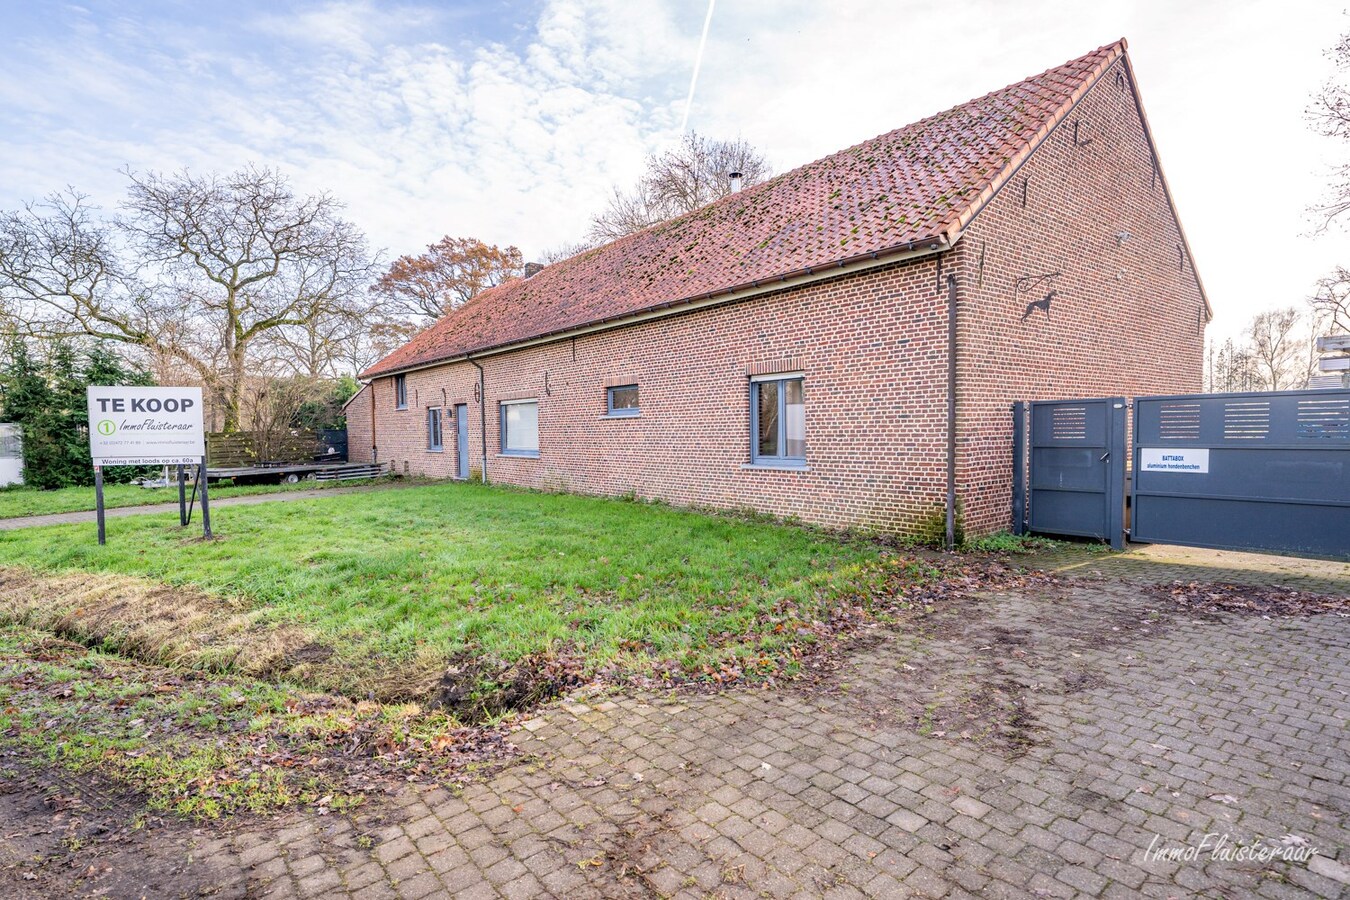 House with shed and outbuildings on approx. 60a in Rillaar (Flemish Brabant) 